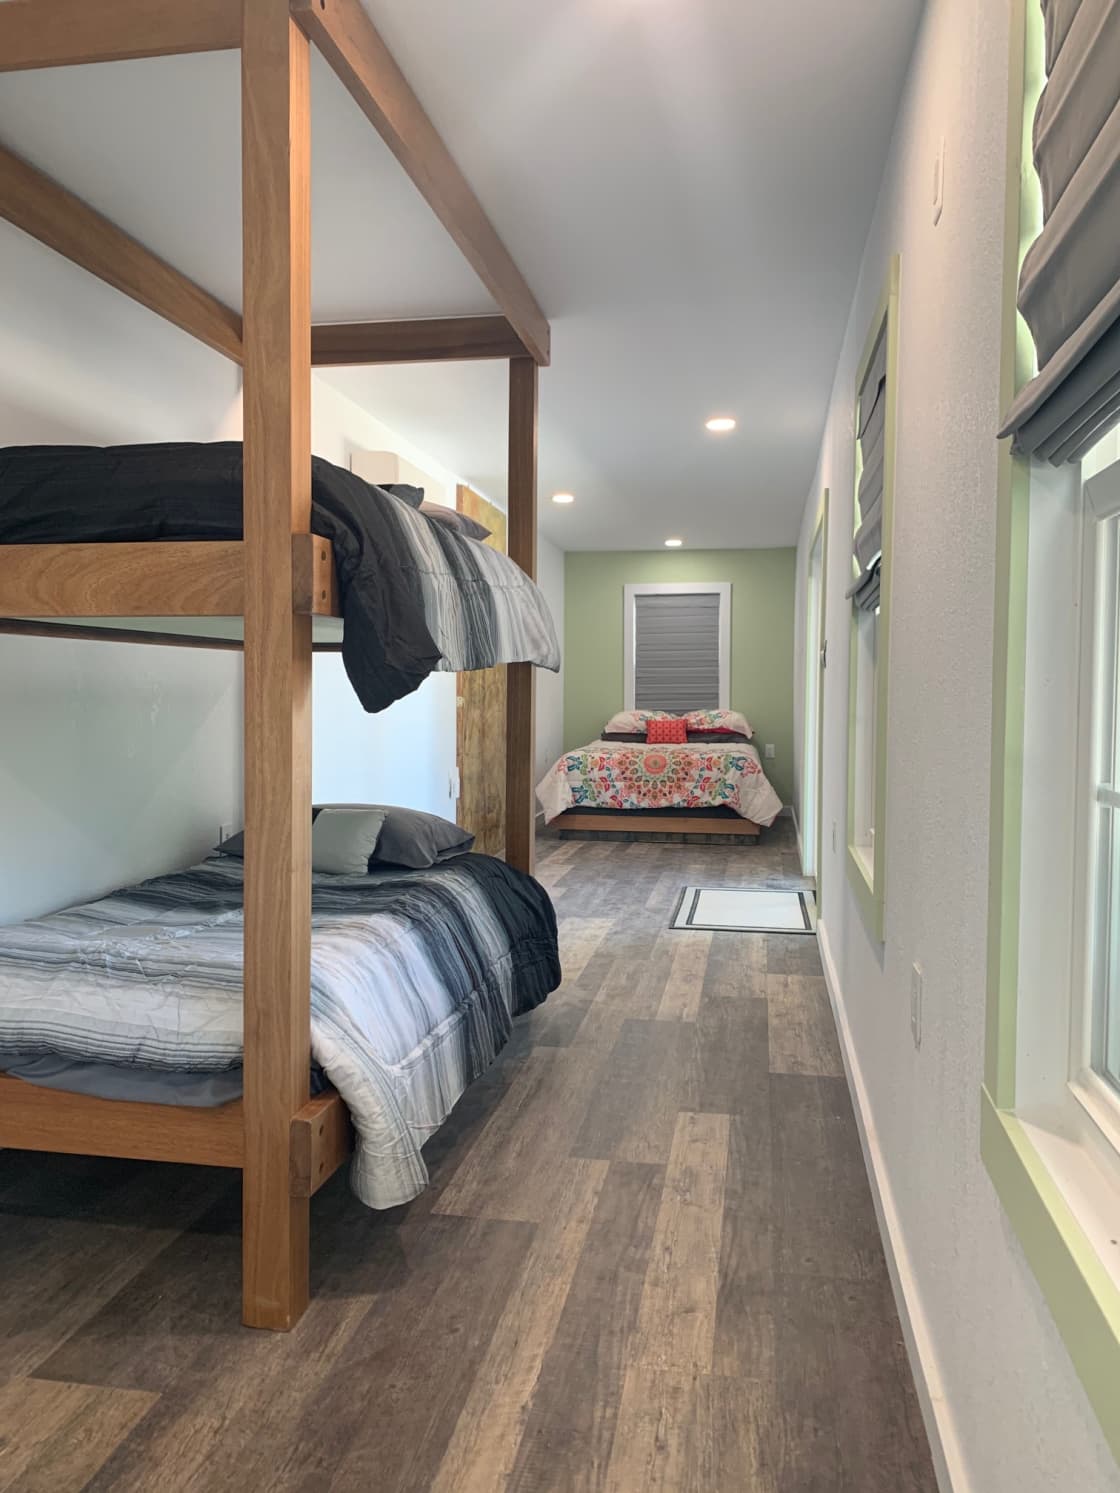 Queen bed and bunkbeds in shipping container bunkhaus